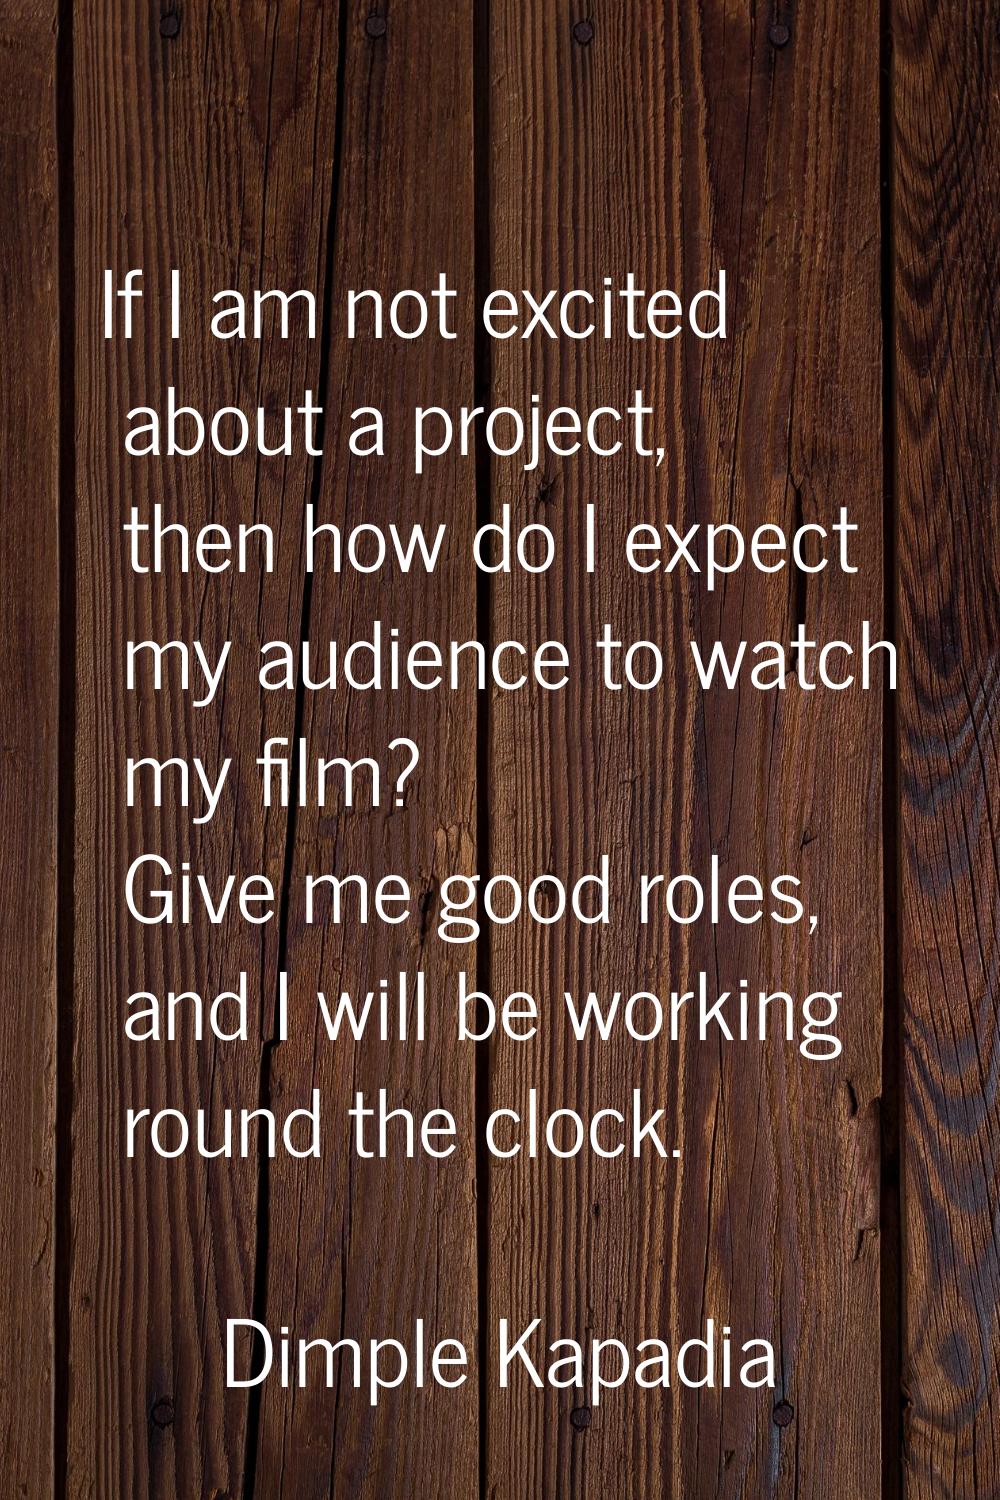 If I am not excited about a project, then how do I expect my audience to watch my film? Give me goo